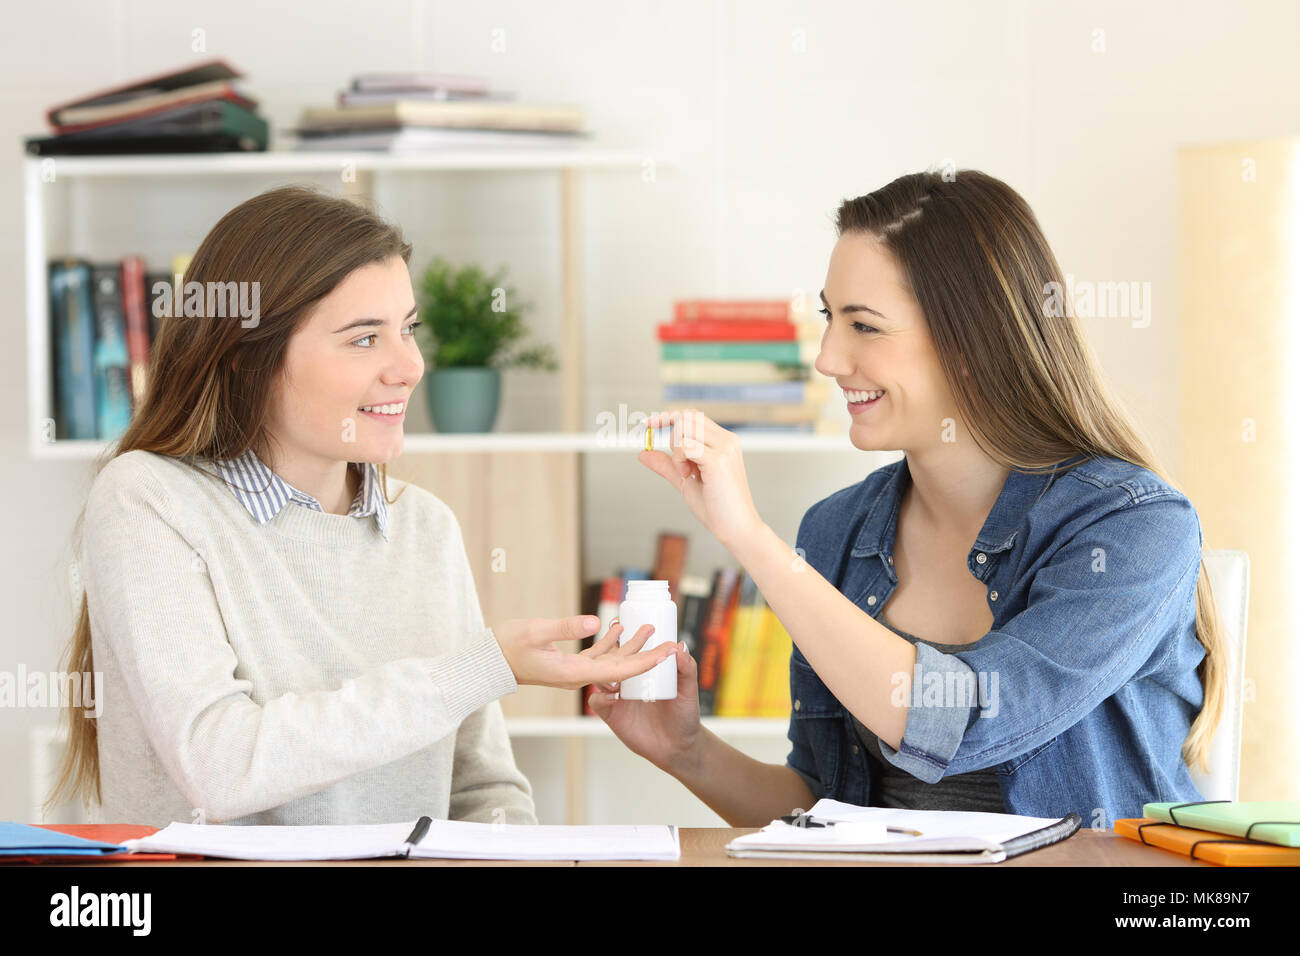 Student studying and offering a vitamin supplement to a friend at home Stock Photo